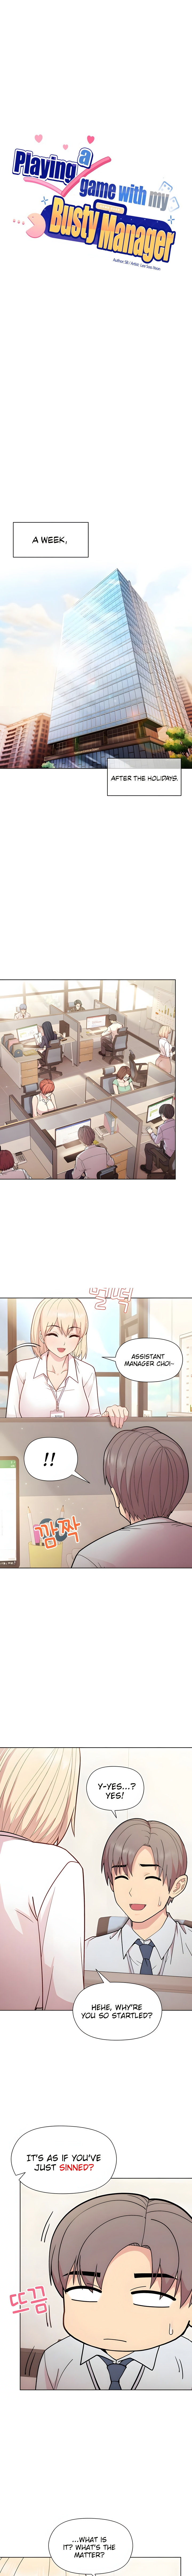 Playing a game with my Busty Manager - Chapter 8 Page 1